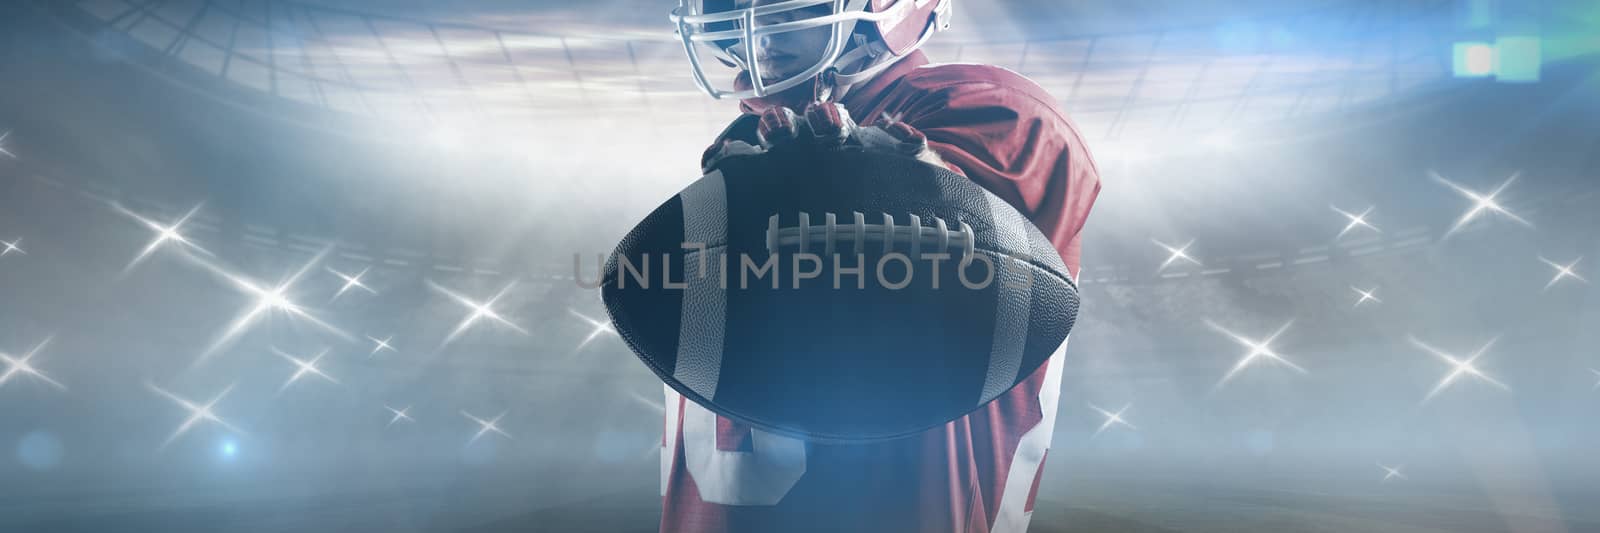 American football player standing in rugby helmet and holding rugby ball by Wavebreakmedia